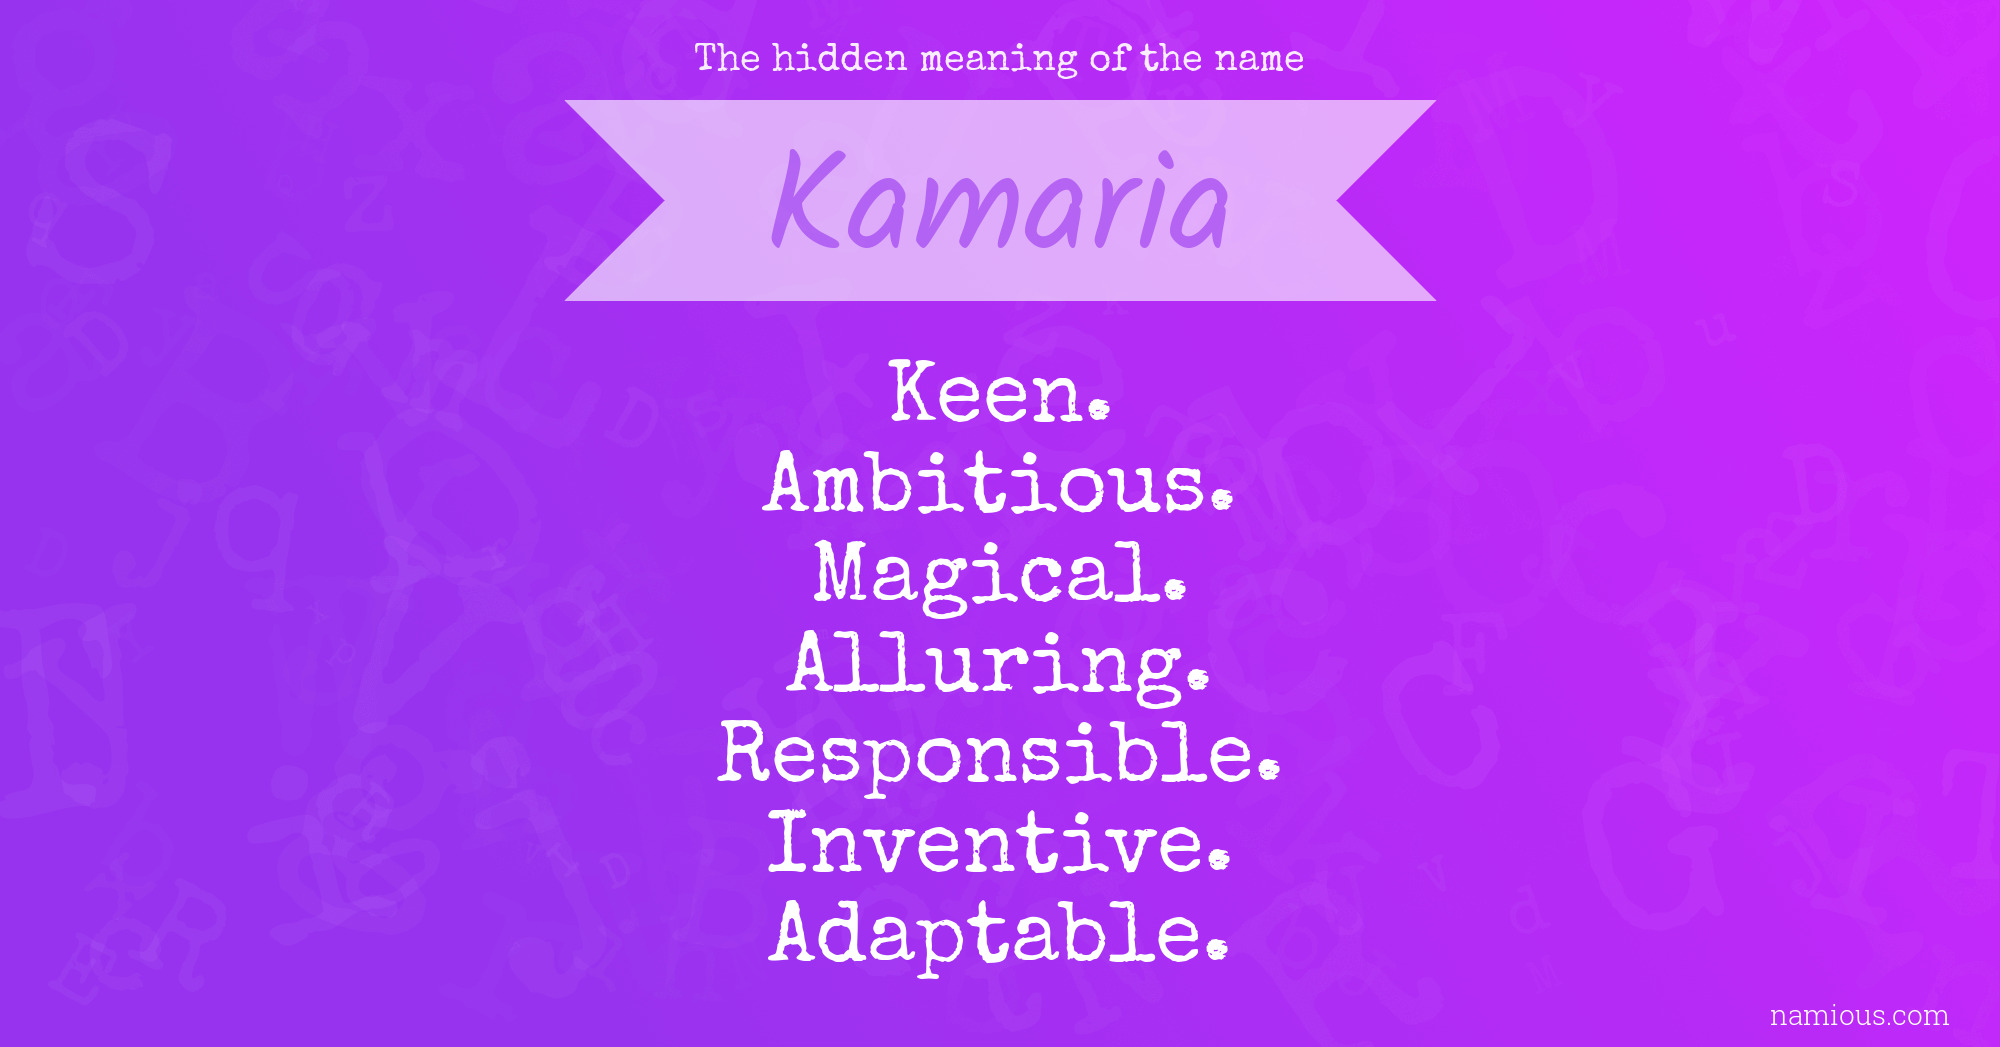 The hidden meaning of the name Kamaria